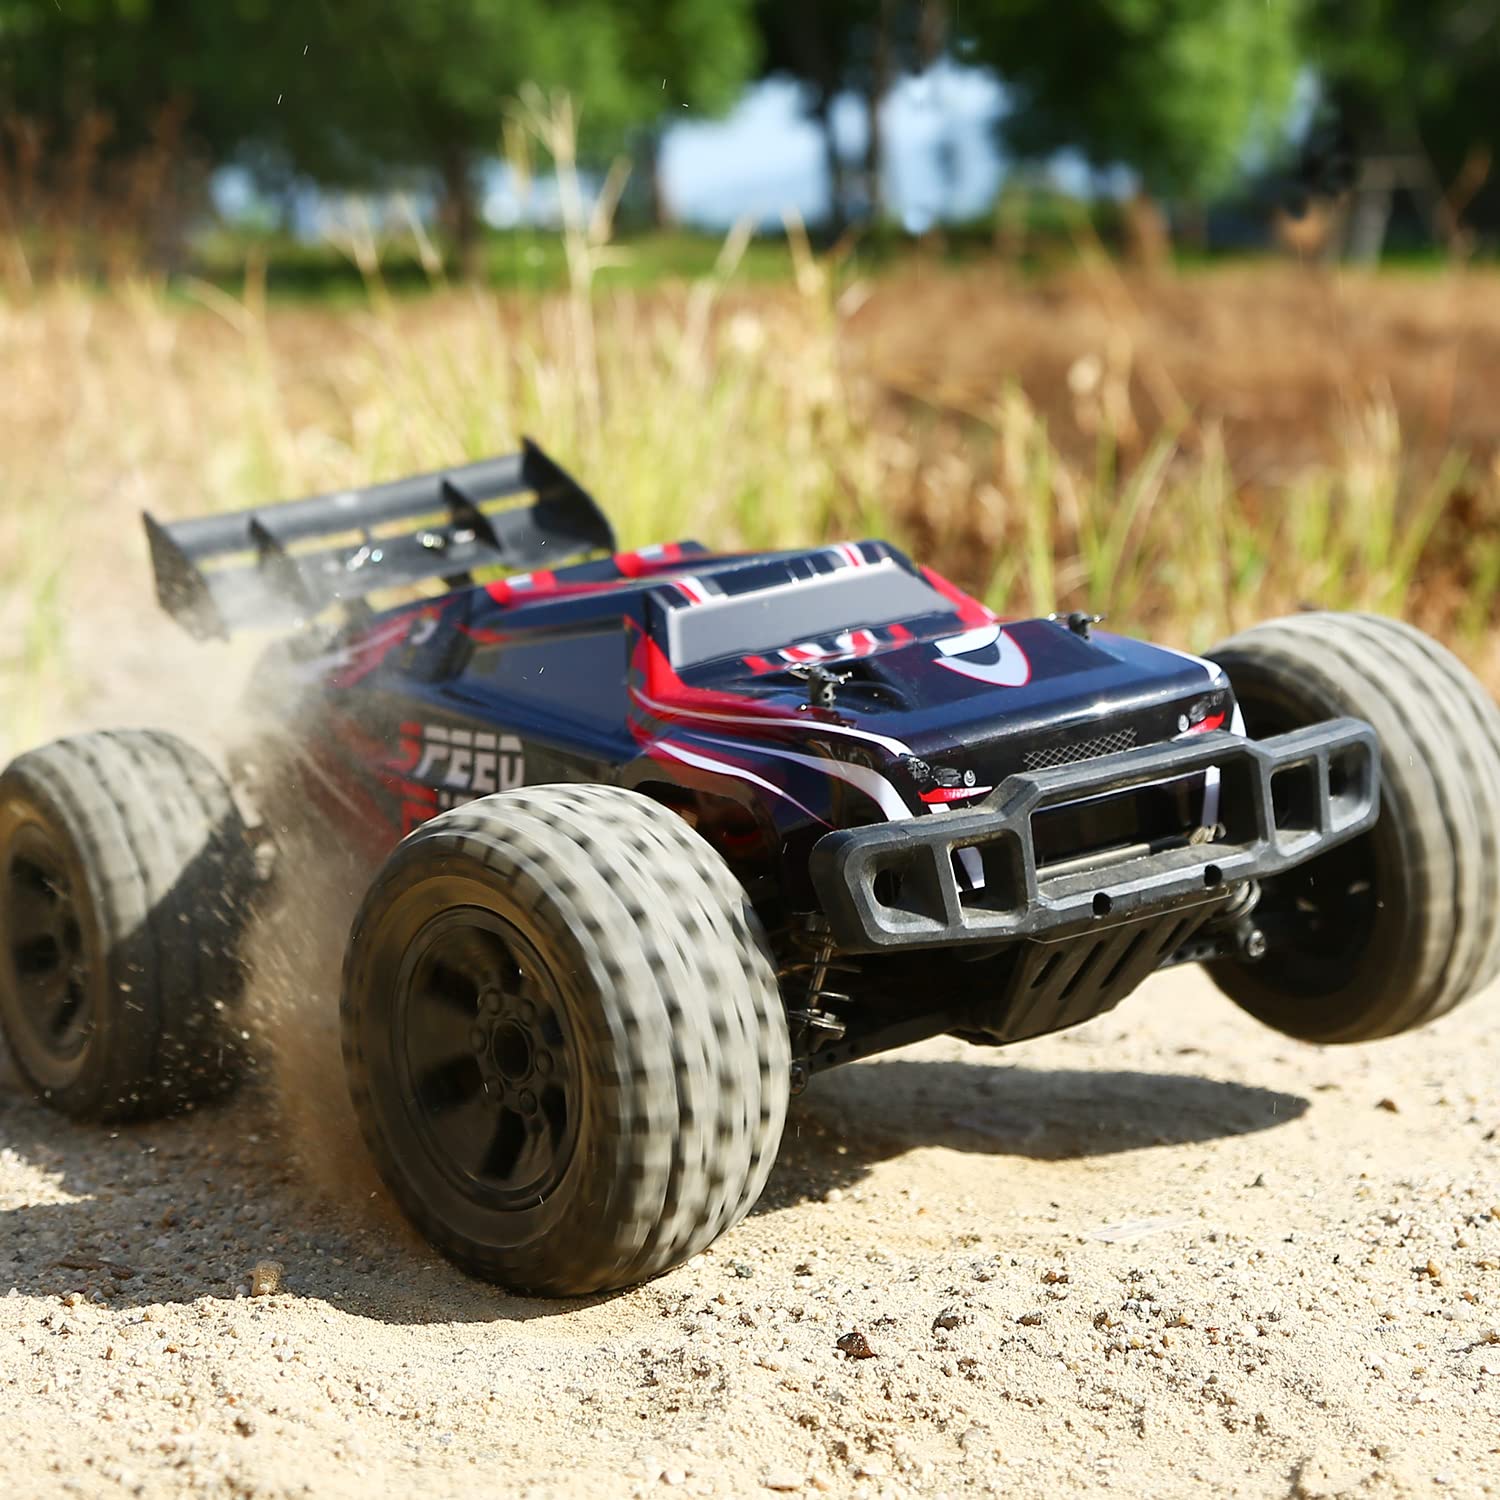 DEERC 9206E DIY Extra Shell 1:10 Scale Large RC Cars,48+ KM/H Hobby Grade High Speed Remote Control Car for Adults Boys,All Terrain 4WD 2.4GHz Off Road Monster RC Truck with 2 Battery for 40+ Min Play